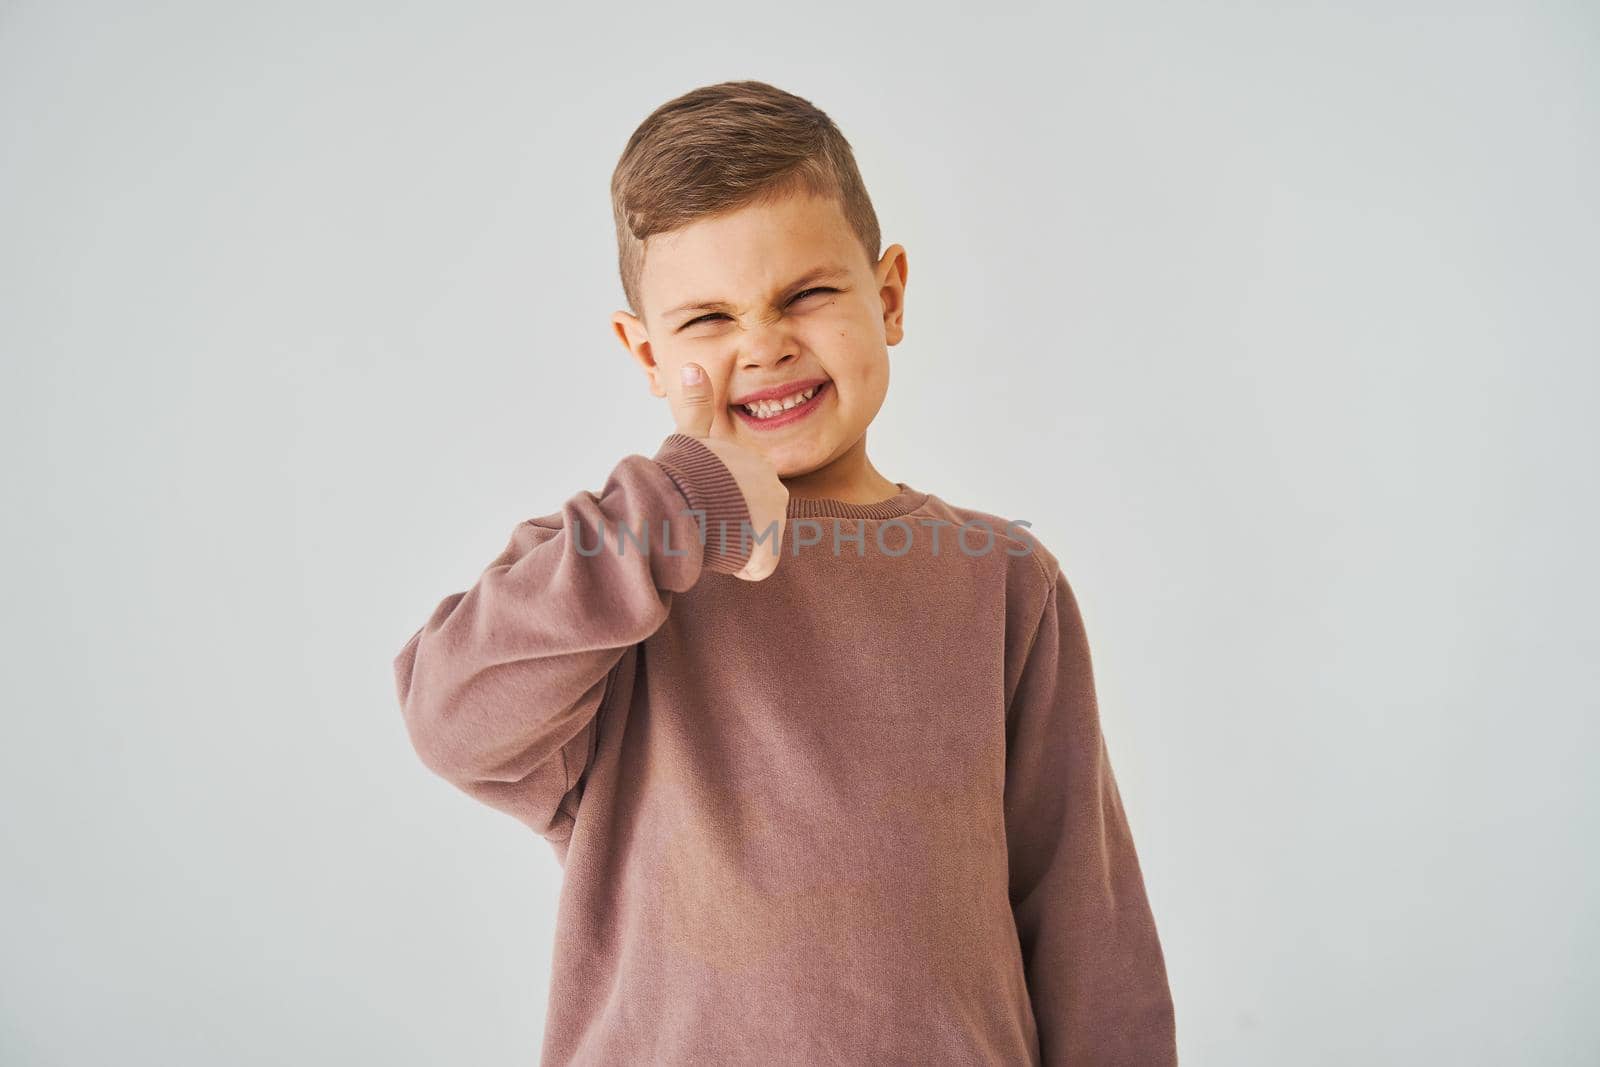 Happy child boy shows thumbs up and smiles on white background. Handsome kid posing and smiling